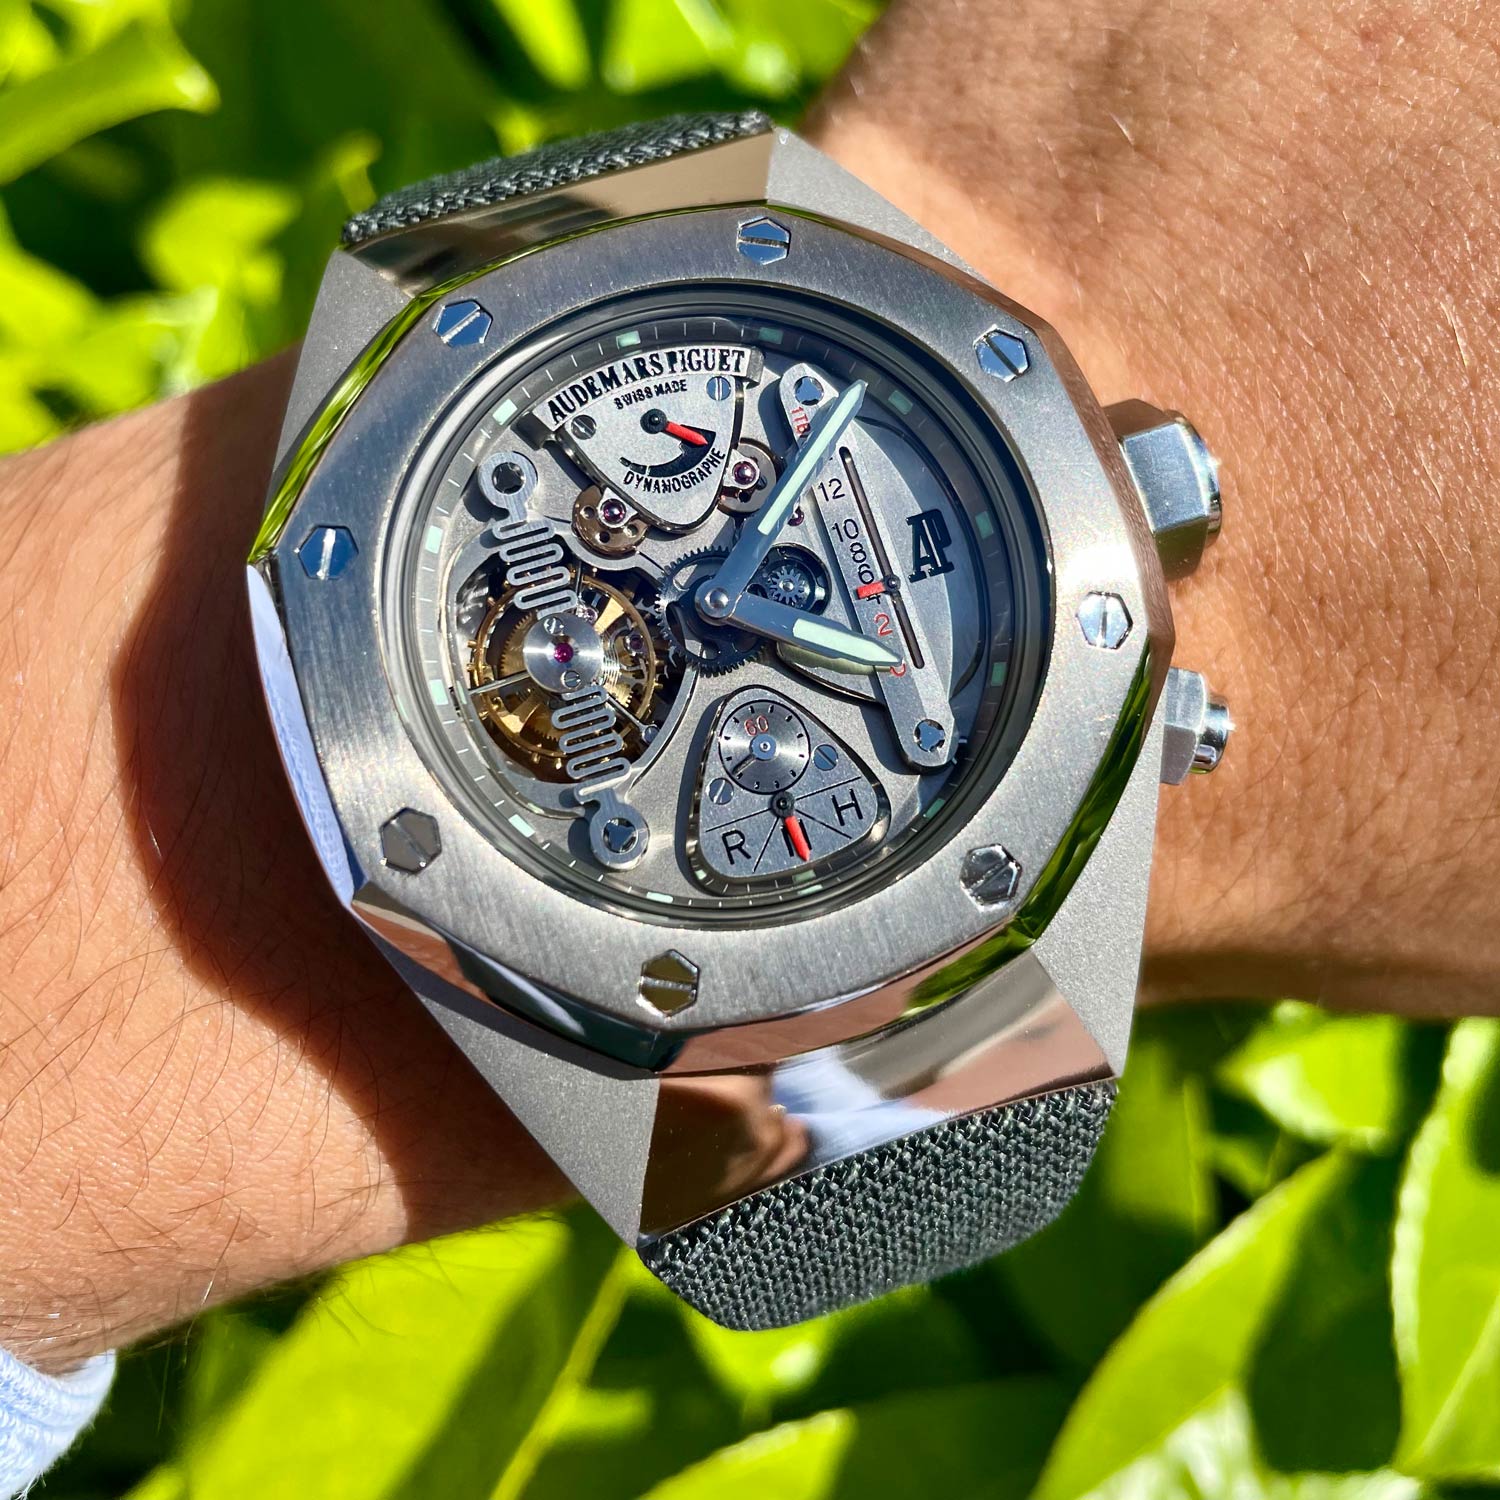 Lot 256 Audemars Piguet: Extremely Rare 150 Pieces Limited Edition, Semi-Skeletonized Tourbillon Oversized Royal Oak Concept Wristwatch in Alacrite, Reference 25980ai, with Extract from The Archives